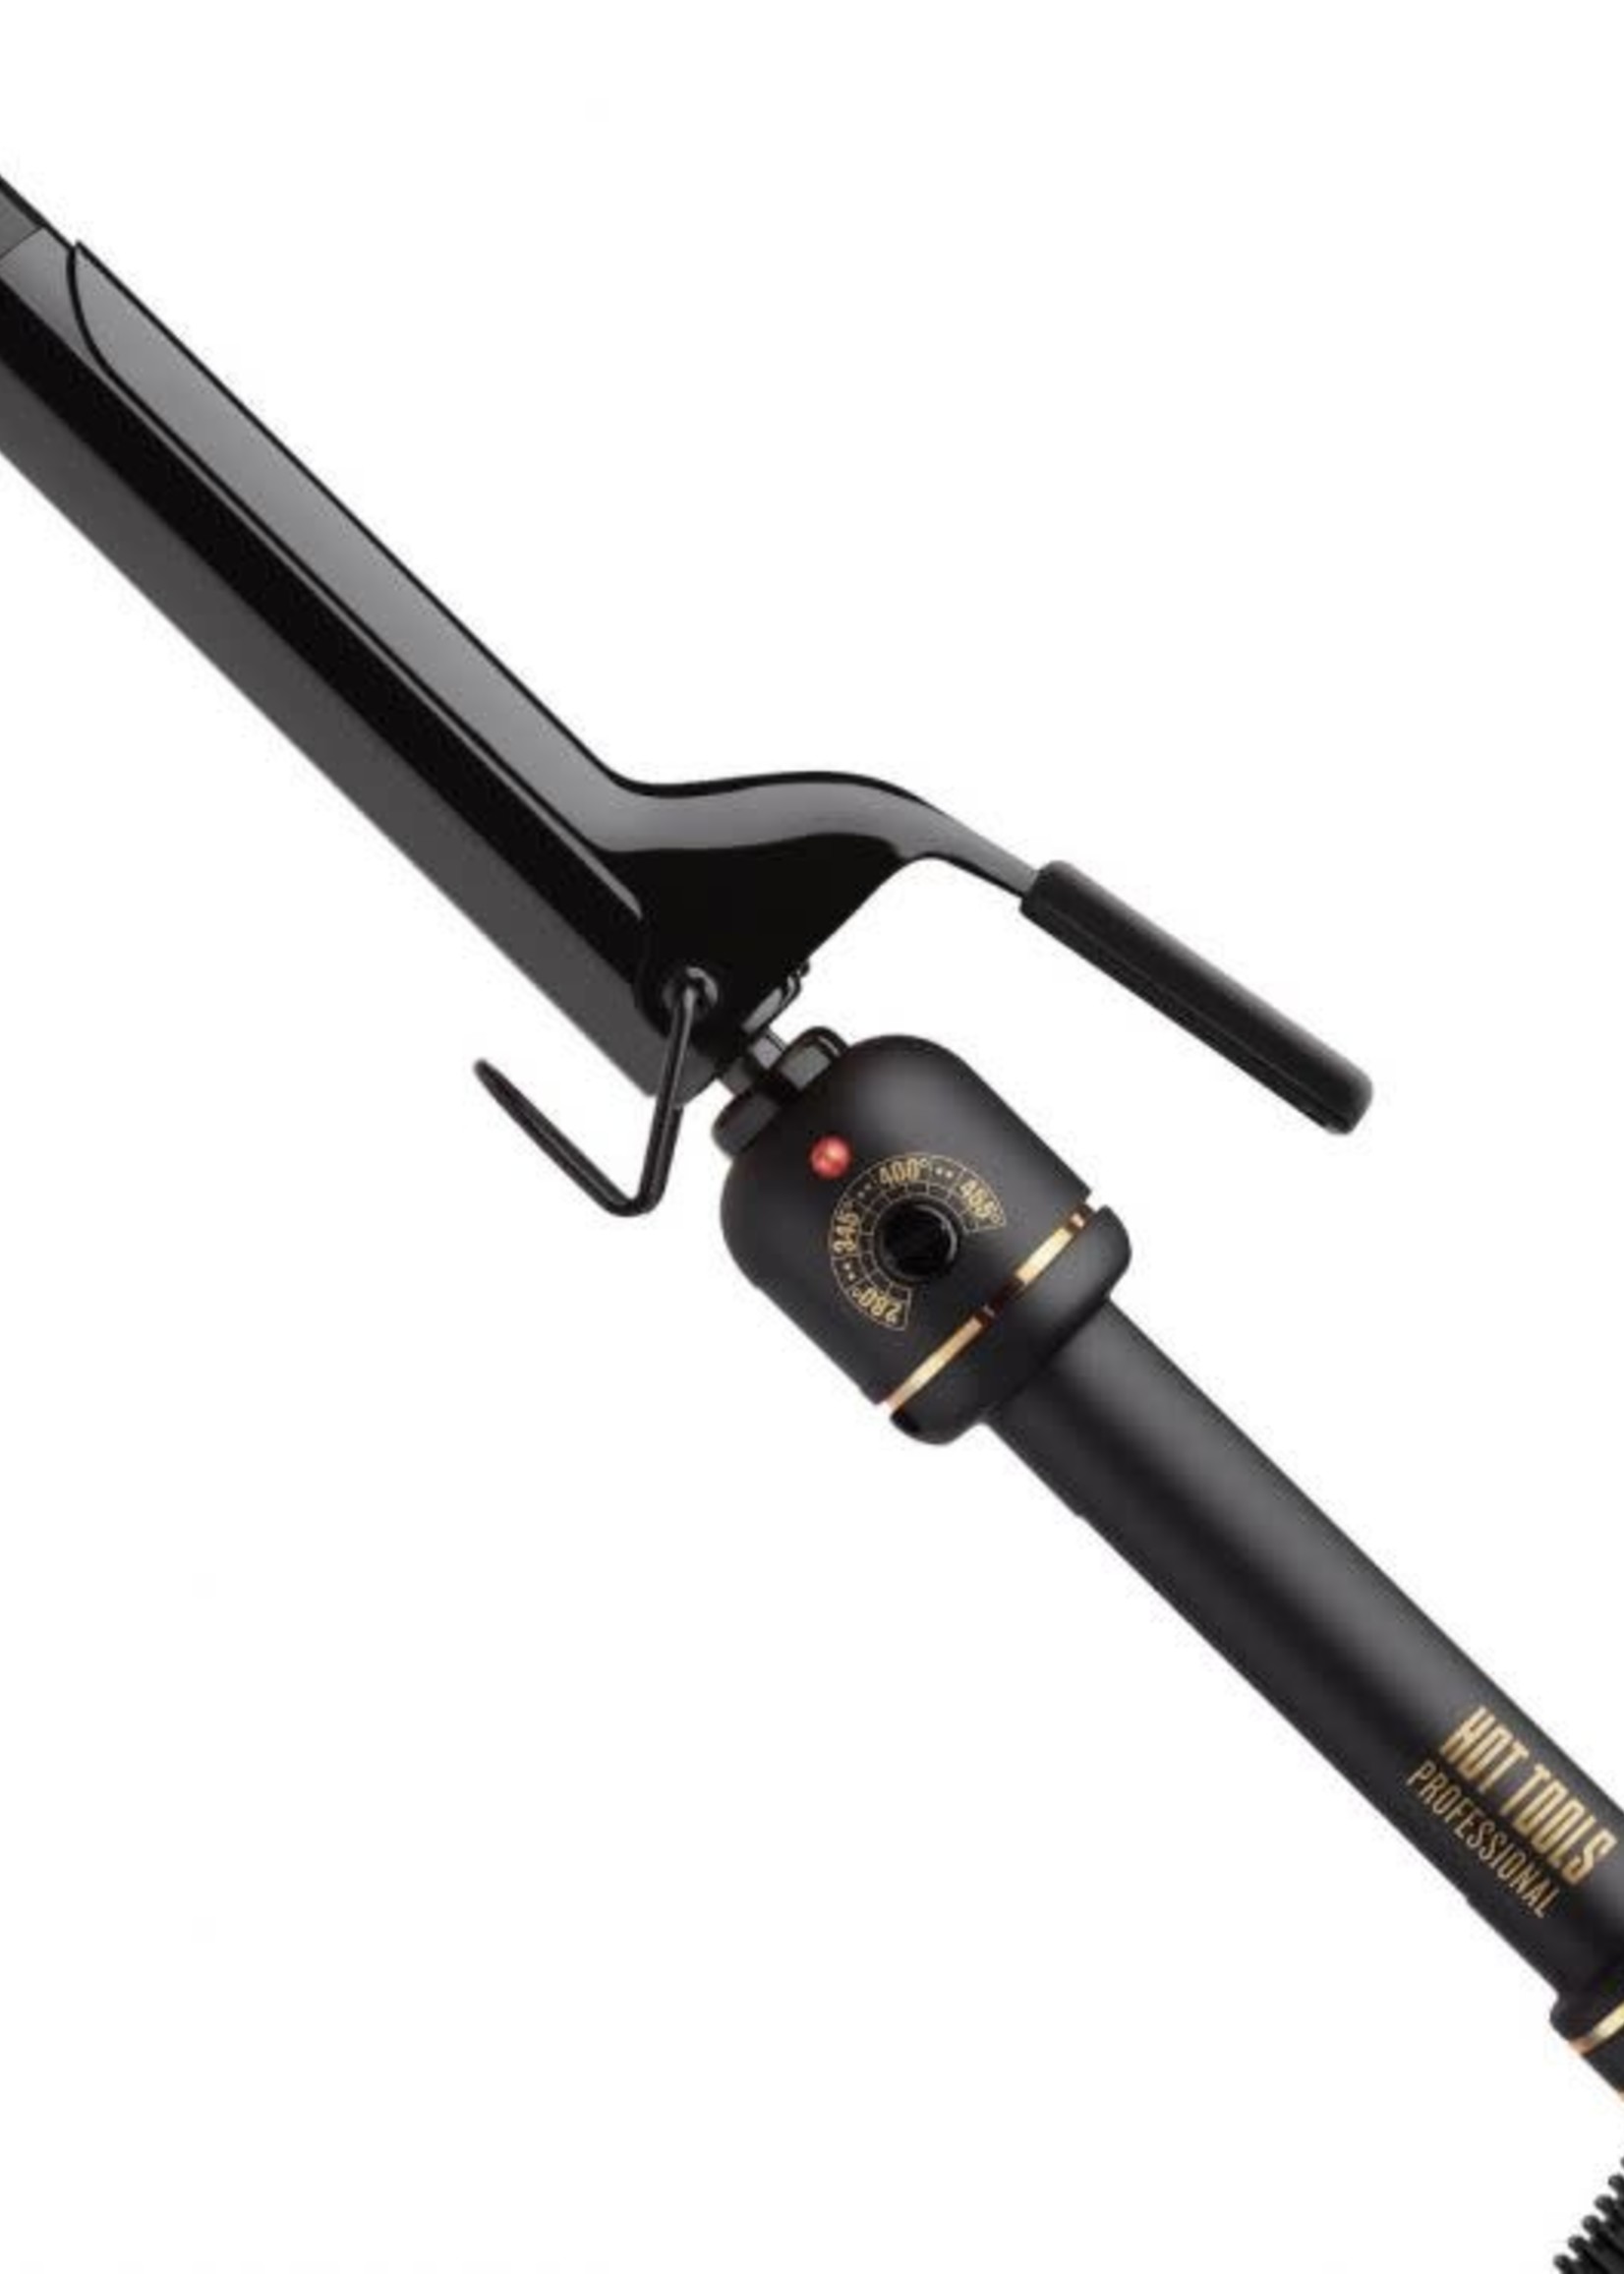 Hot Tools 1" Curling Iron/Wand